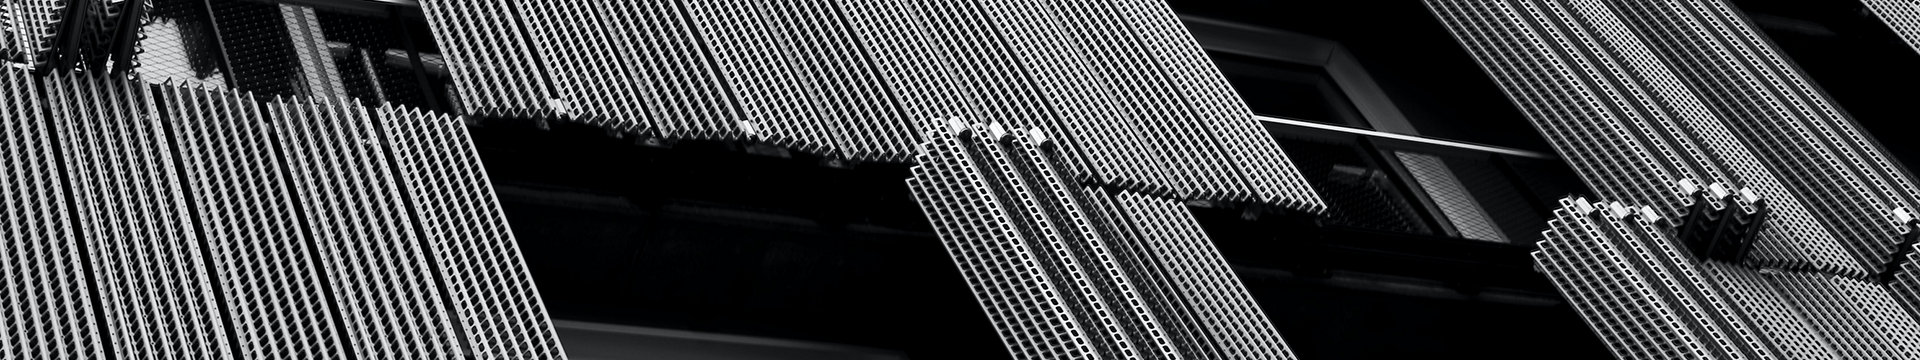 A black and white closeup of windows and cladding on a building